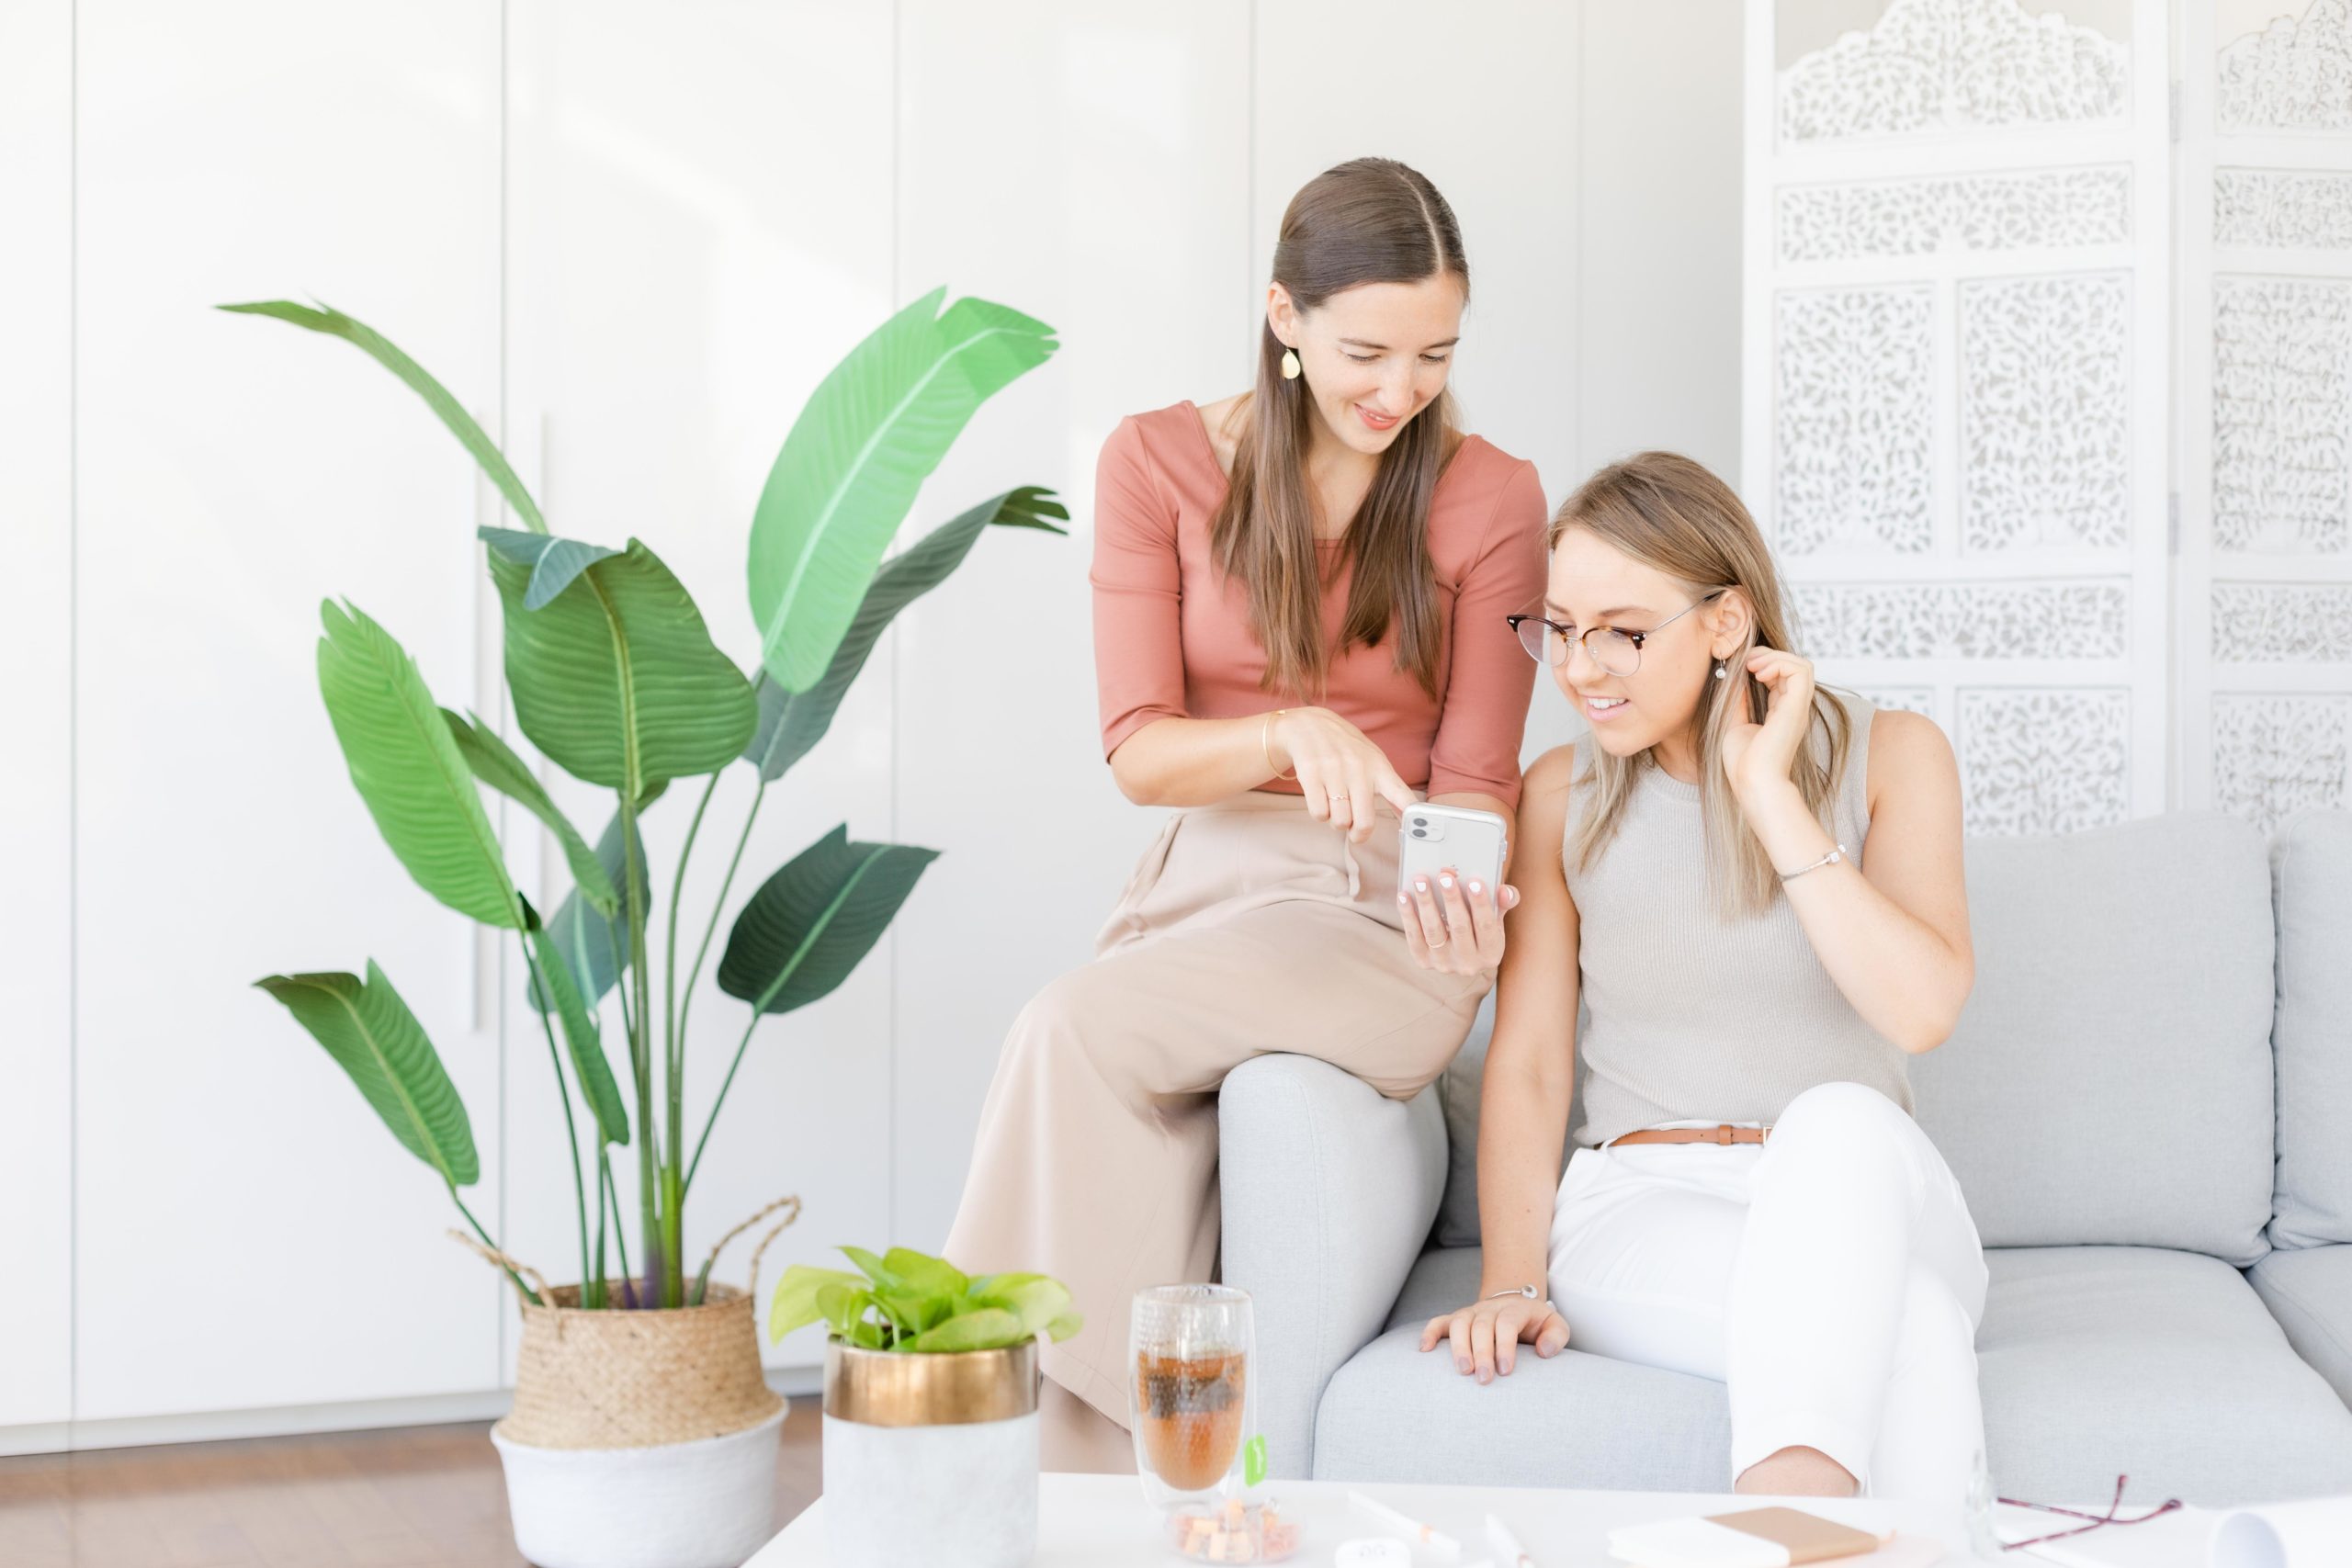 two girls sitting on white couch. One on left holding phone and pointing. Girl on right looking with hand holding hair behind her ear. Green floor plant on the left of the two girls.